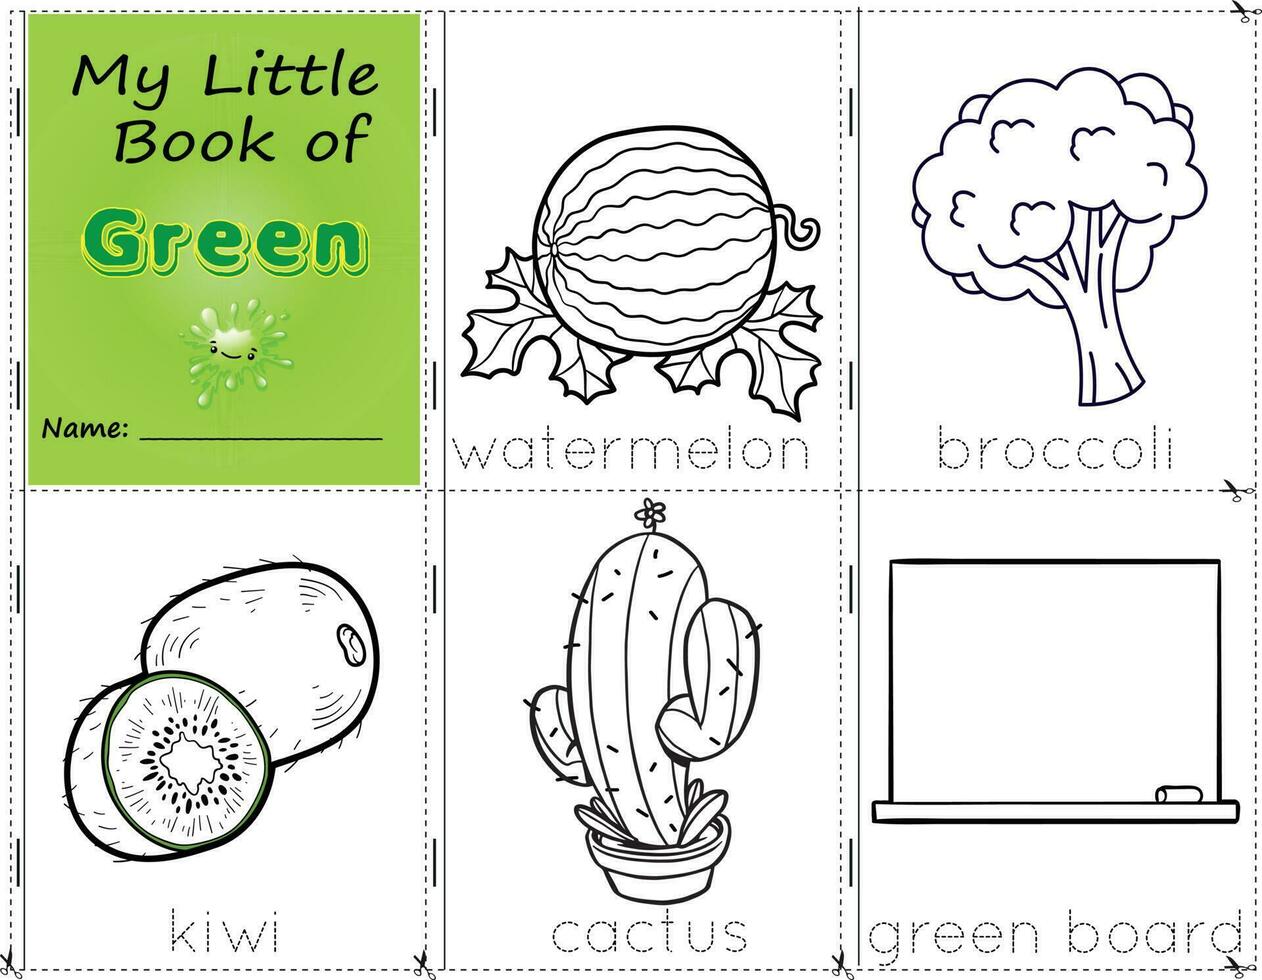 My Little Book of Green Color objects green to paint them as they are in real life. education activities worksheet for children.watermelon, broccoli, kiwi, cactus, and green board vector